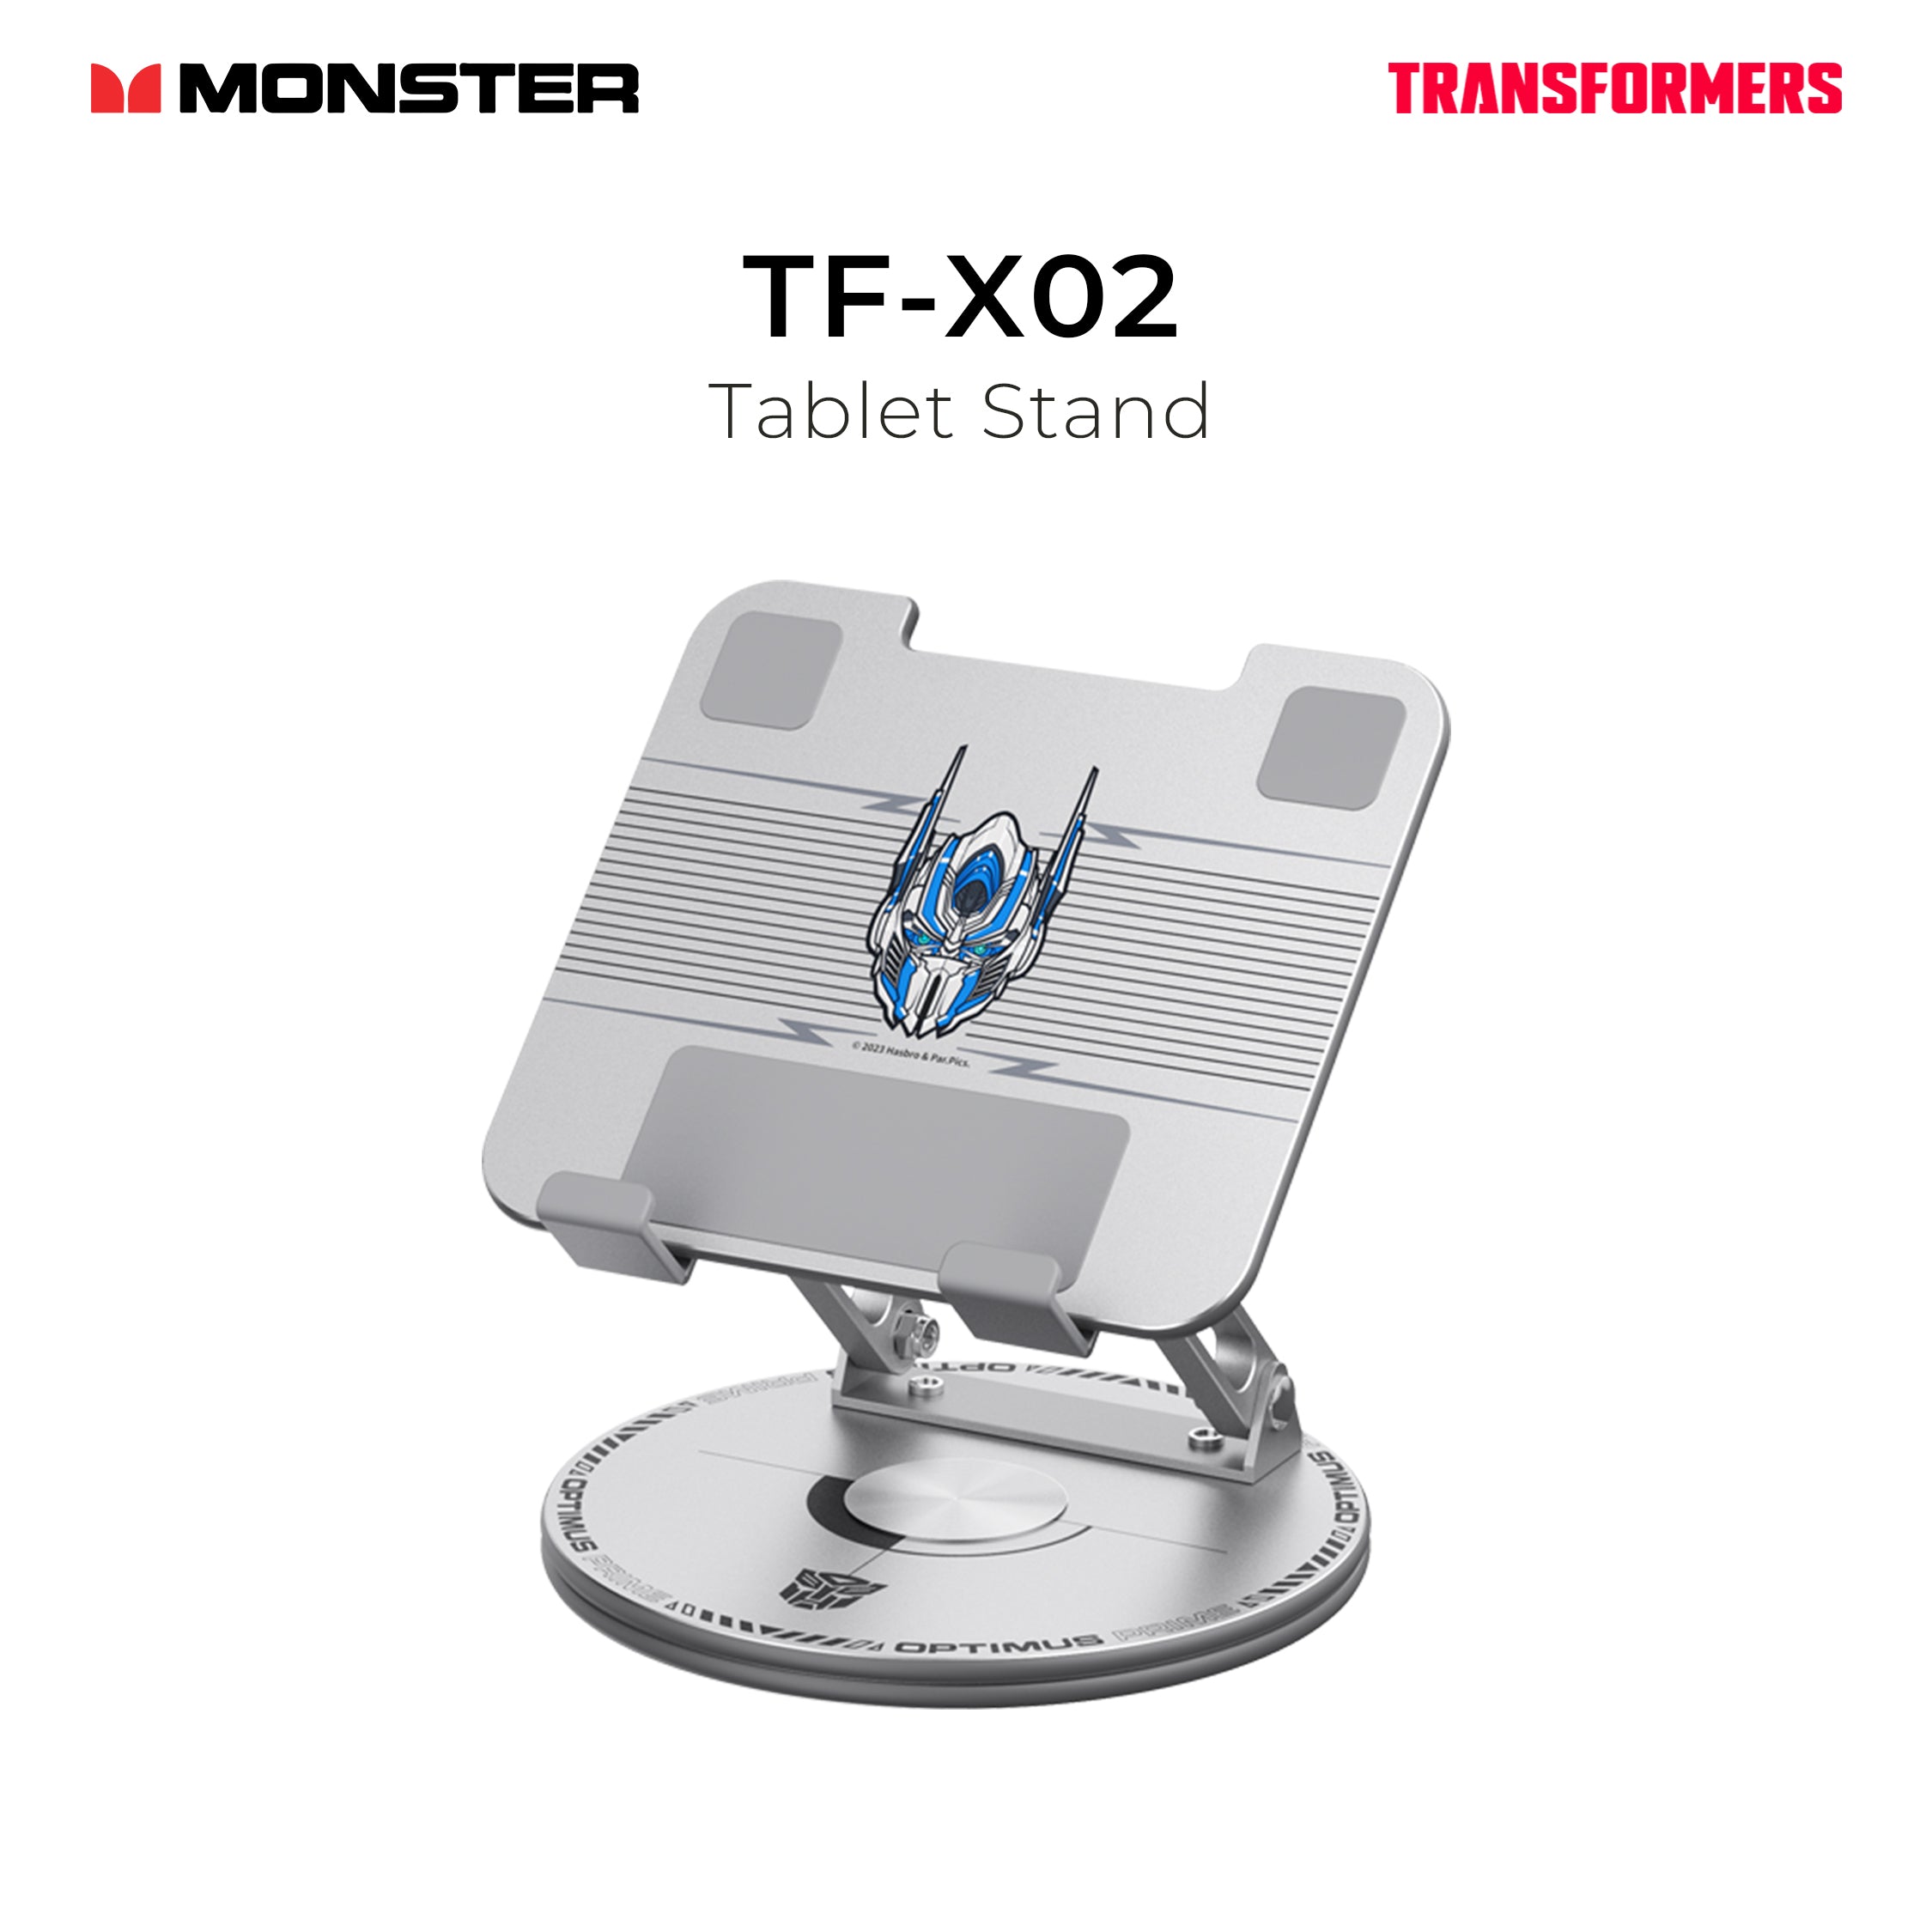 Monster Transformers Tablet Stand TF-X02